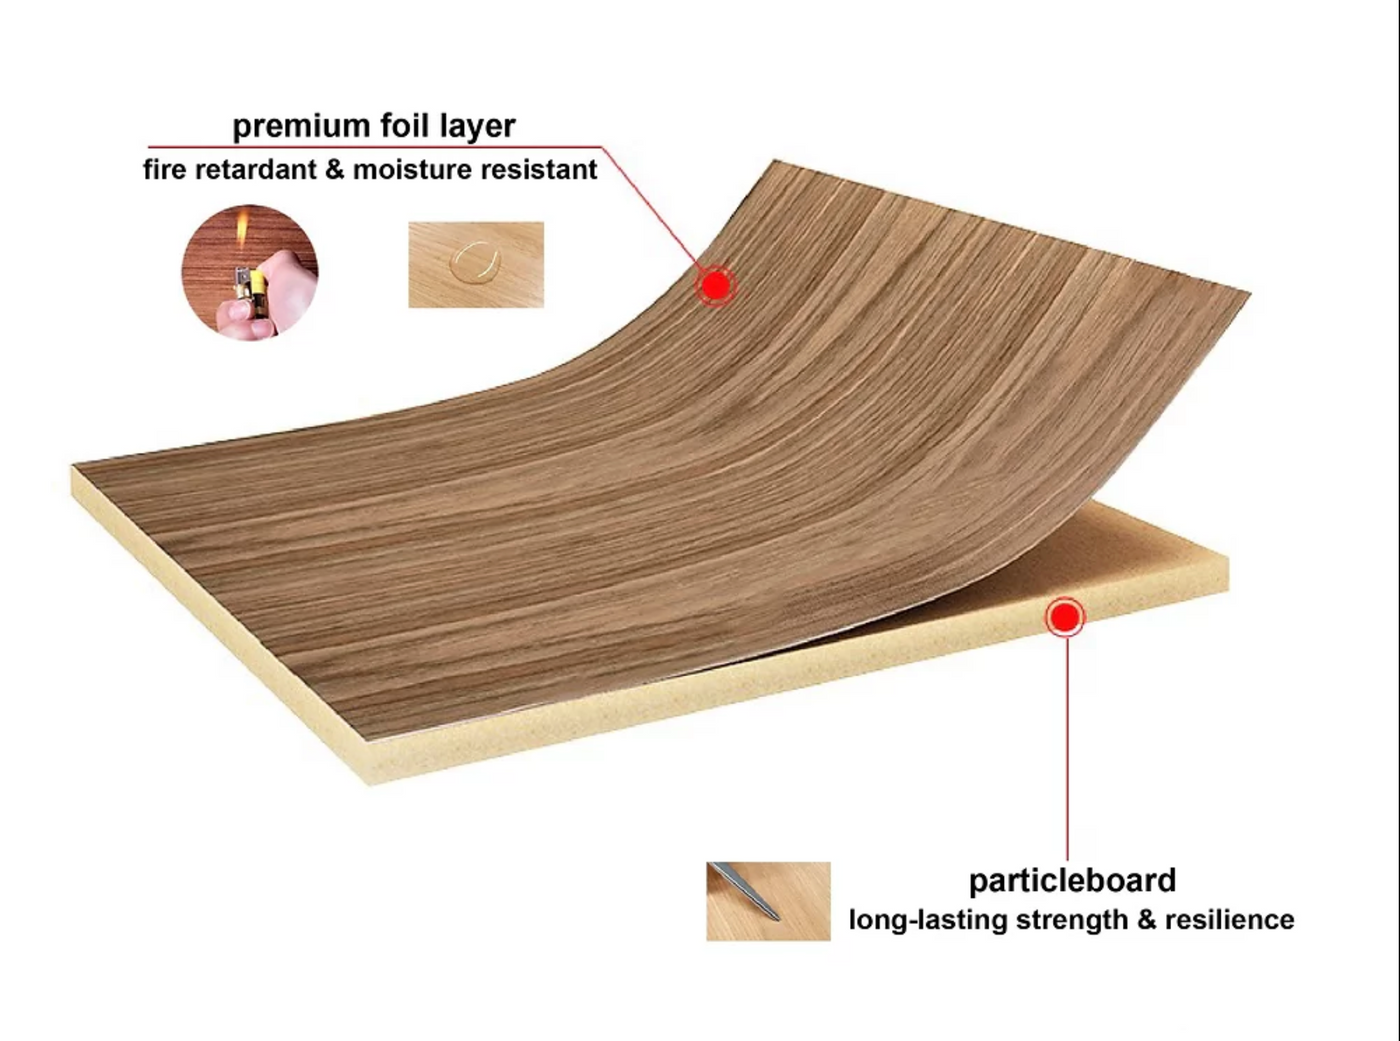 Premium-foil-layer-with-particleboard-long-lasting-strength-resilience